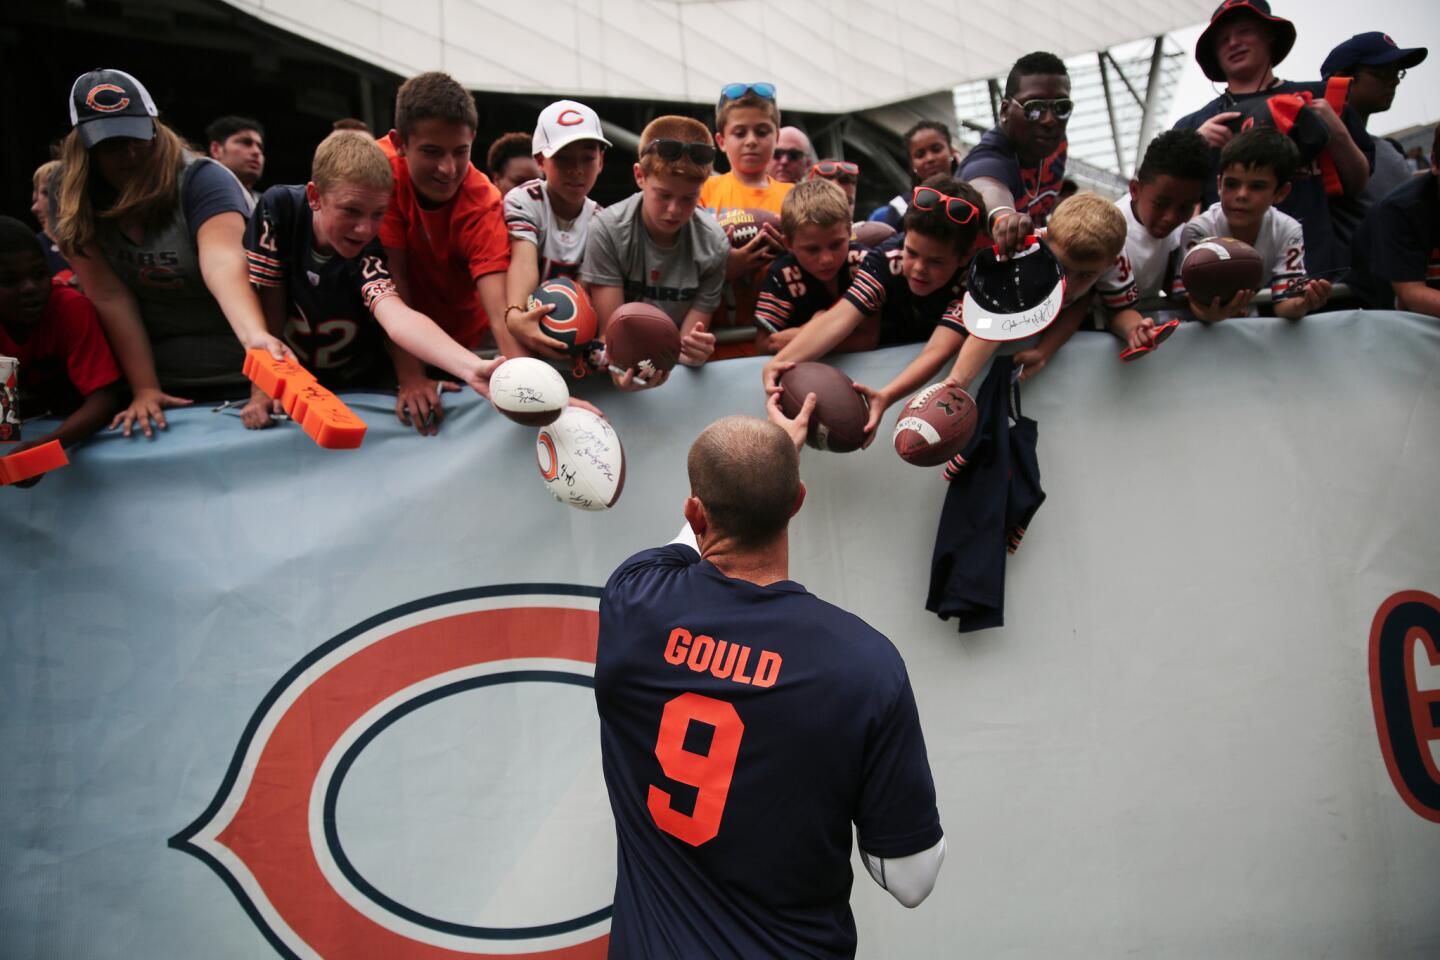 Robbie Gould signs autographs for fans after practice on the Bears Family Fest.